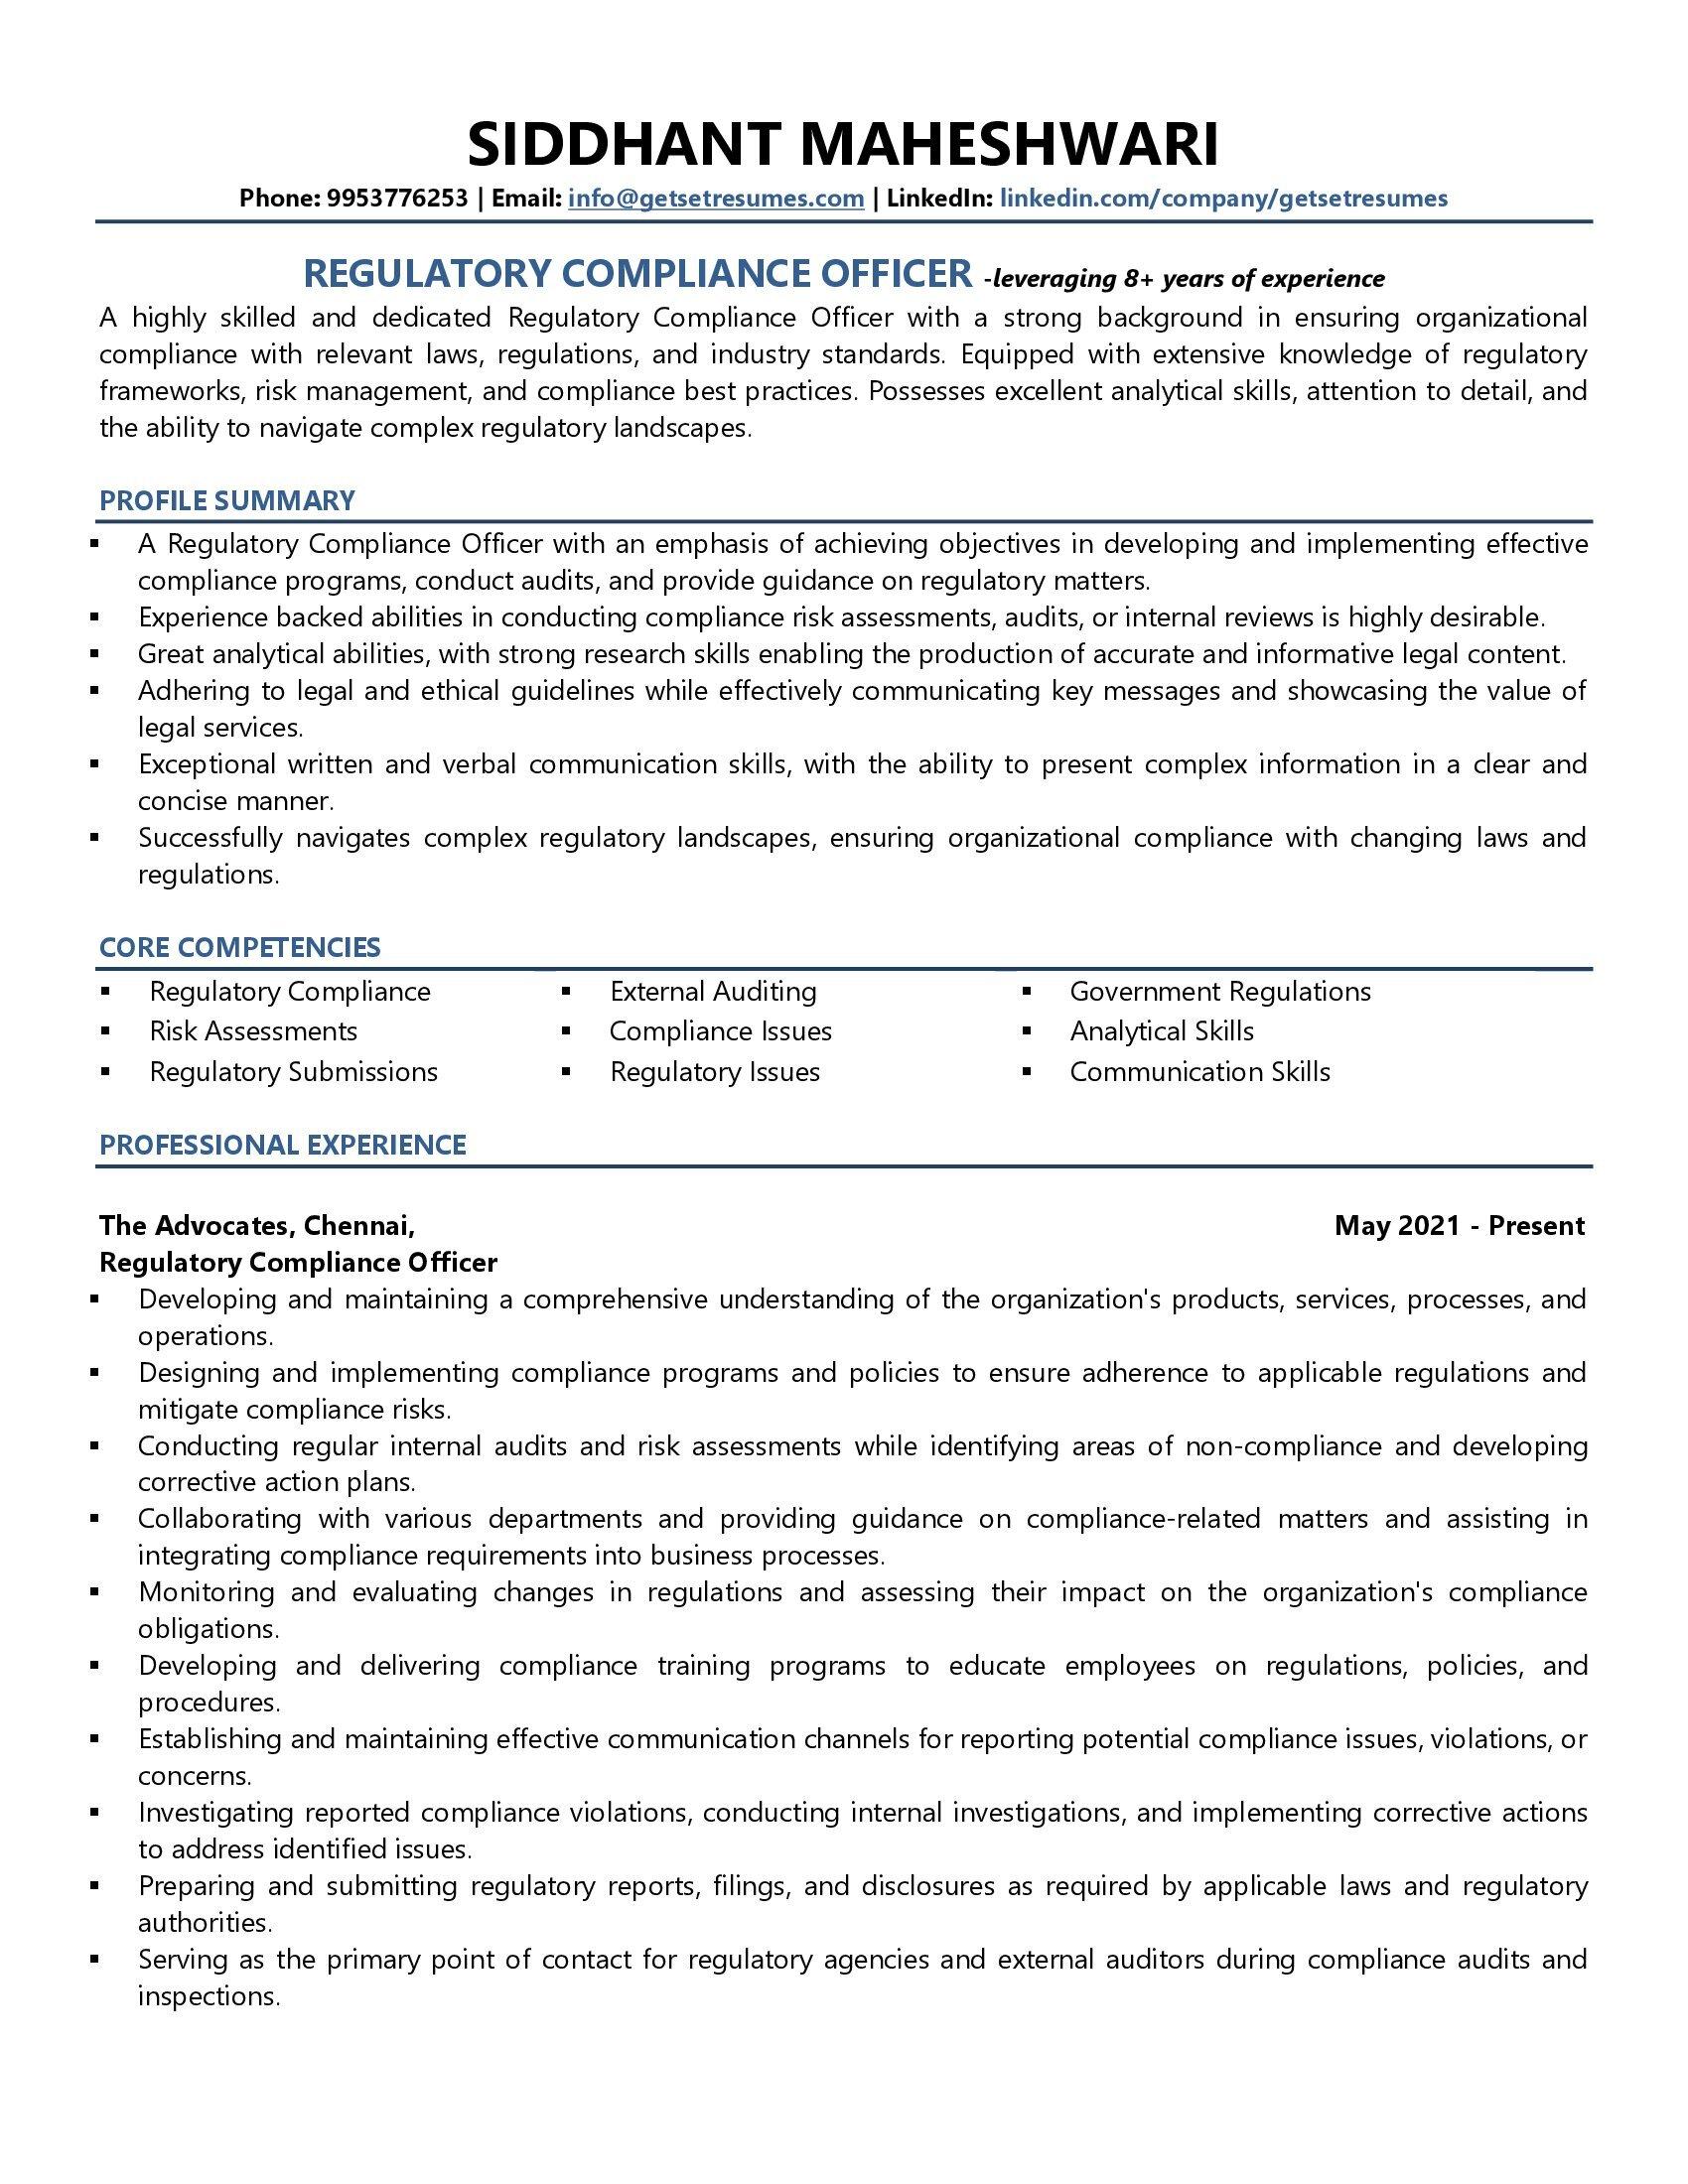 Regulatory Compliance Manager - Resume Example & Template